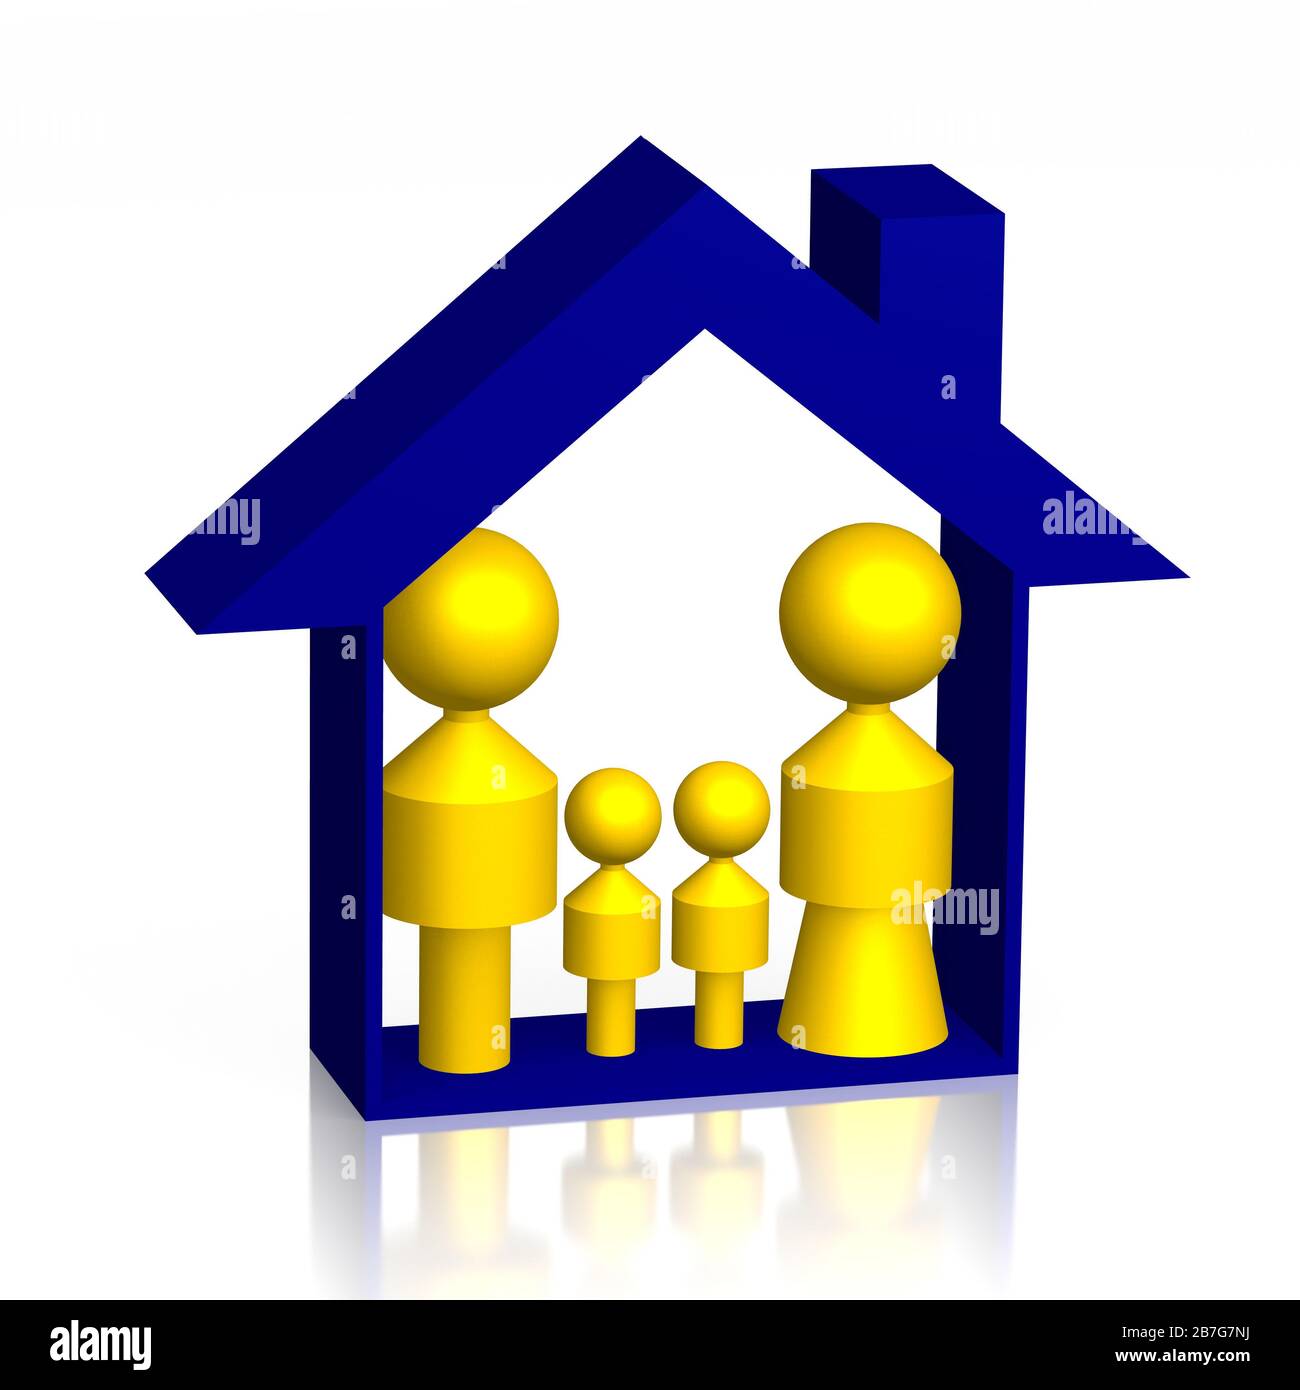 3D house and family shapes - illustration Stock Photo